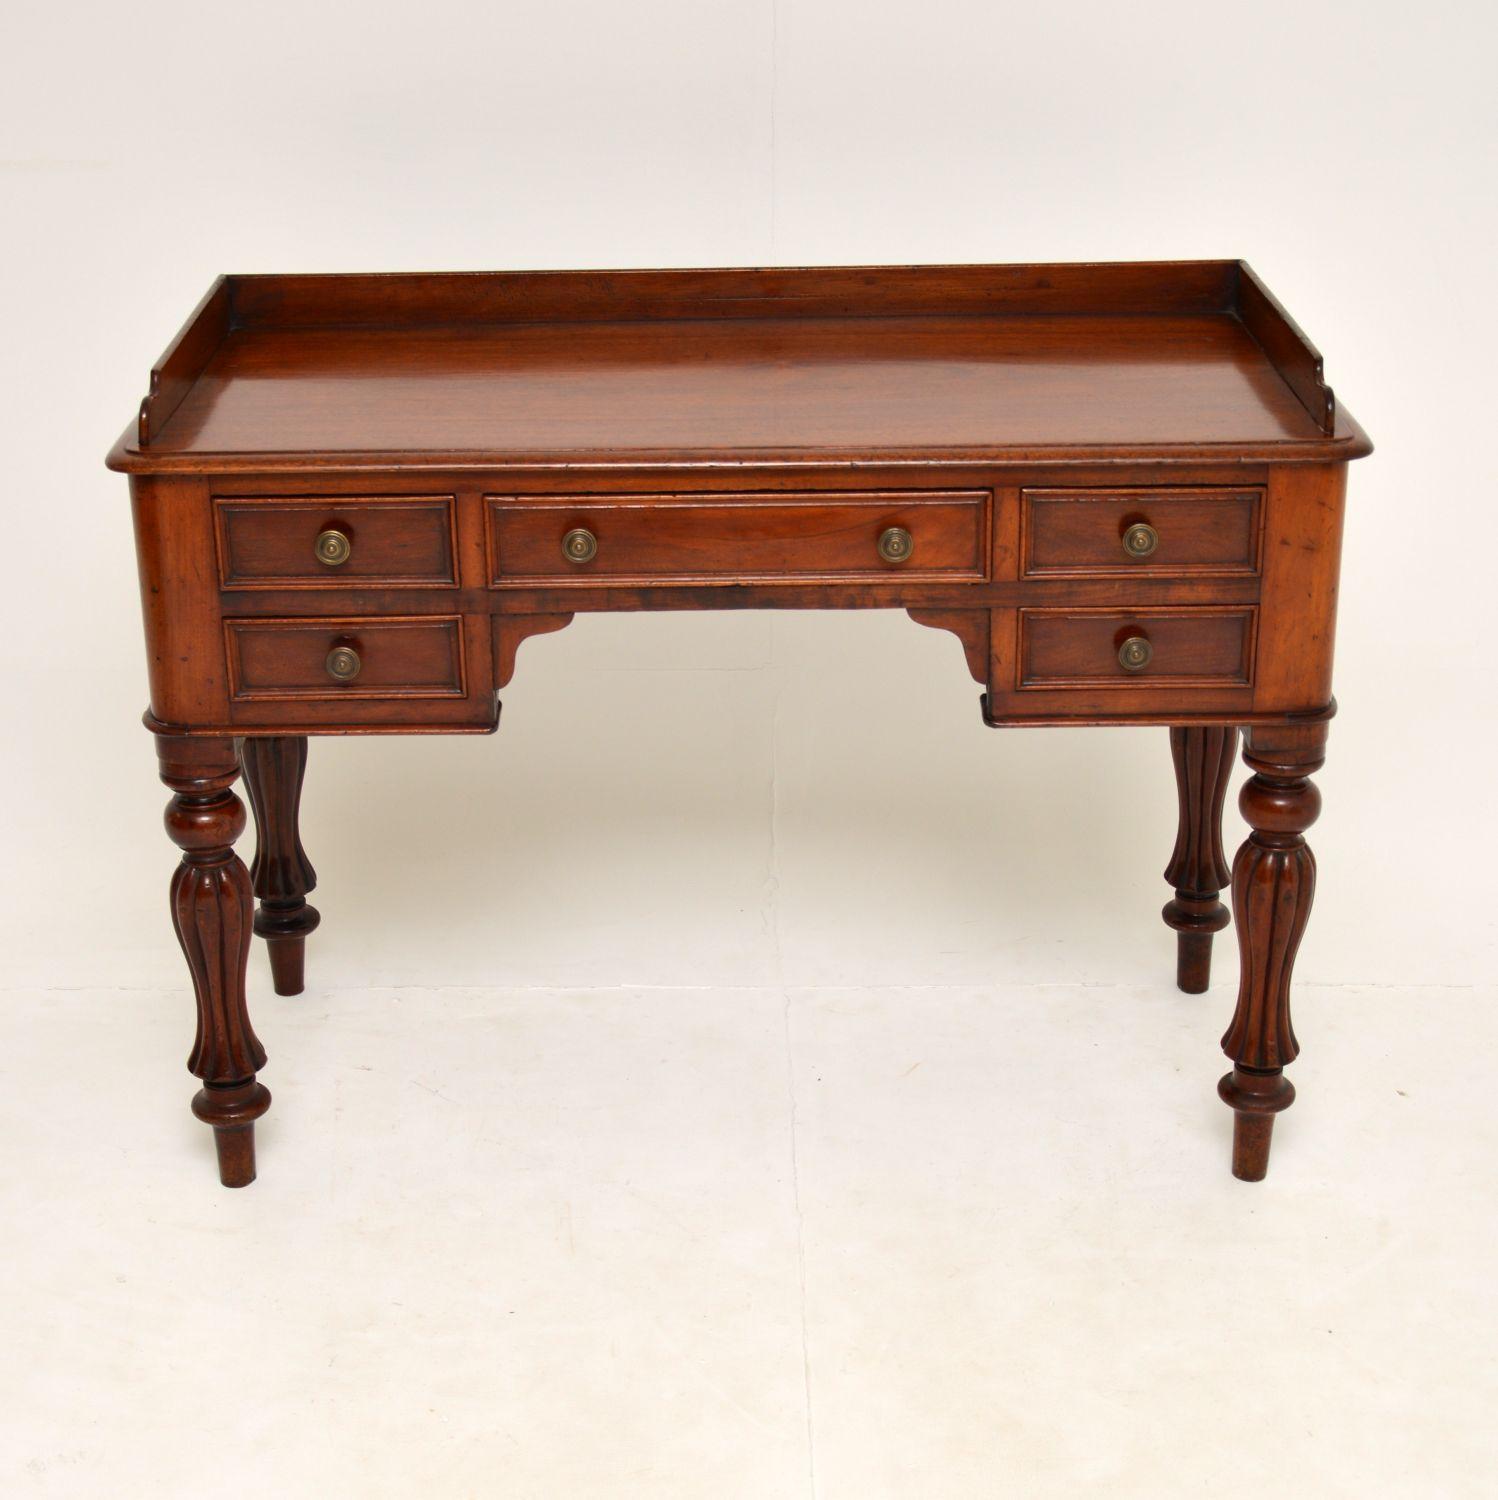 A gorgeous antique William IV period writing table in solid mahogany. This dates from circa 1830s-1840s.

It is of extremely high quality, with thick turned and fluted legs, original brass handles and a gallery around the top. The mahogany has a